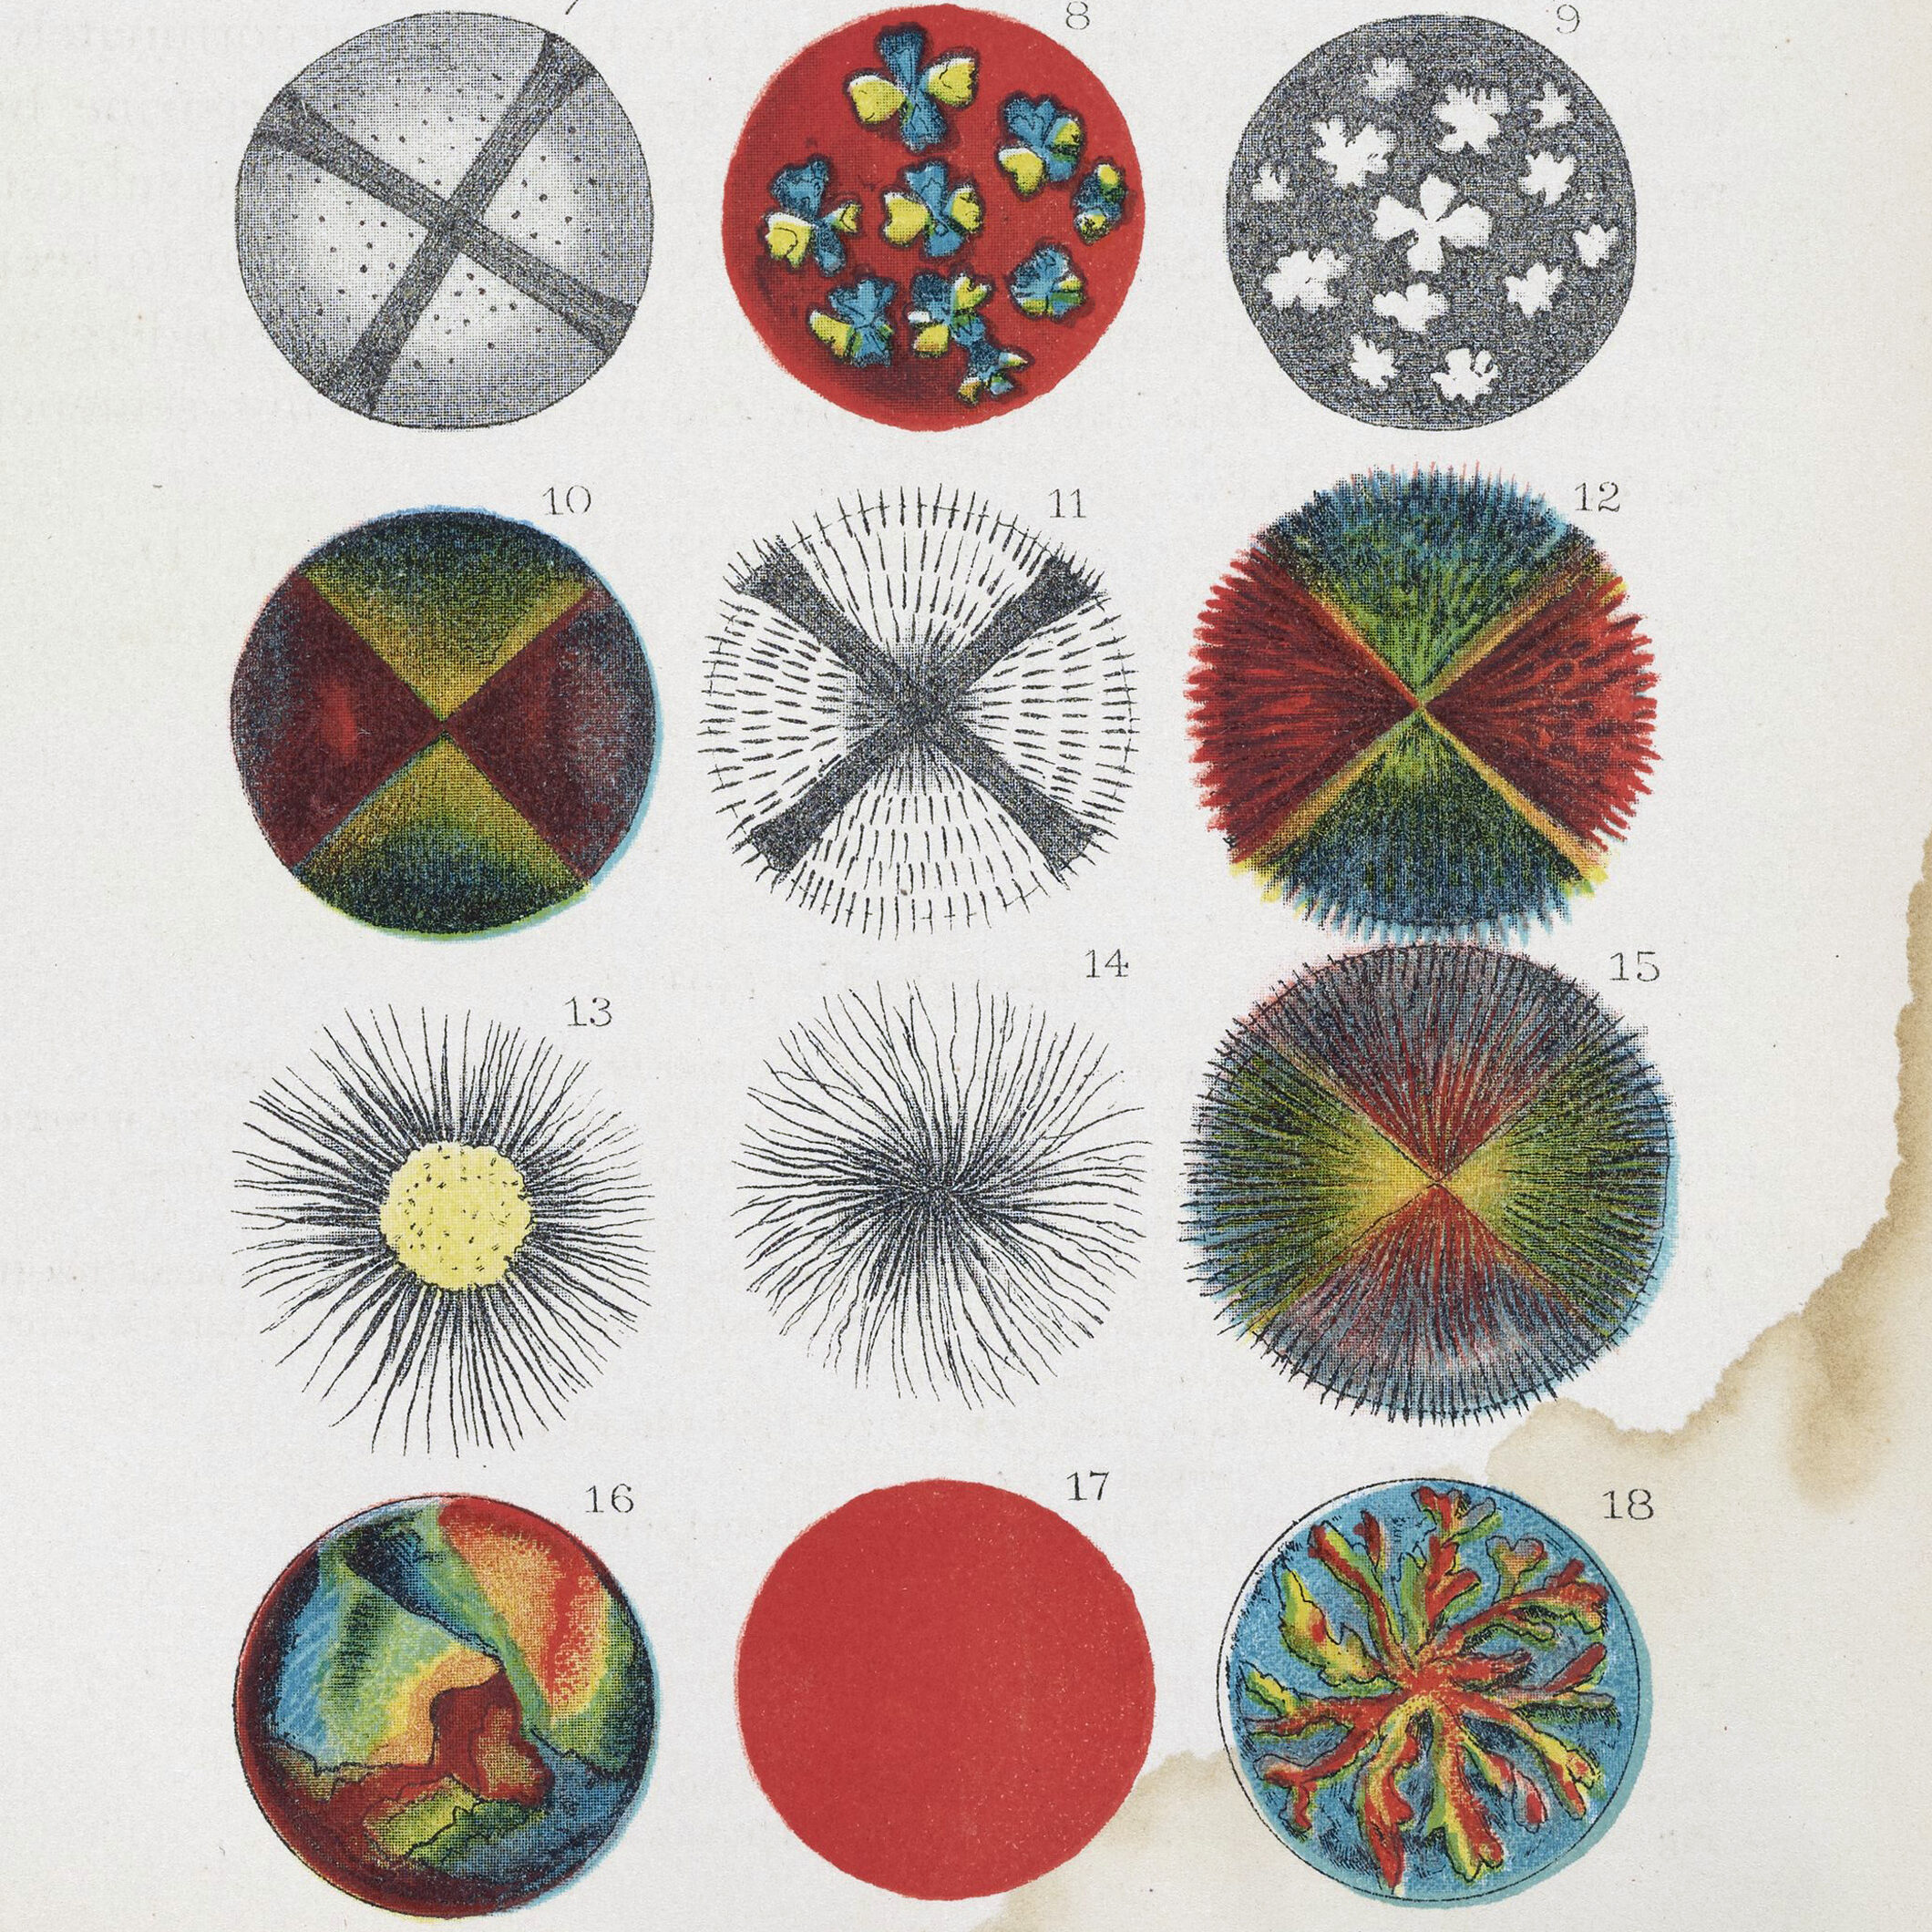 Twelve colorful illustrations from 1886 of various fats under a microscope.